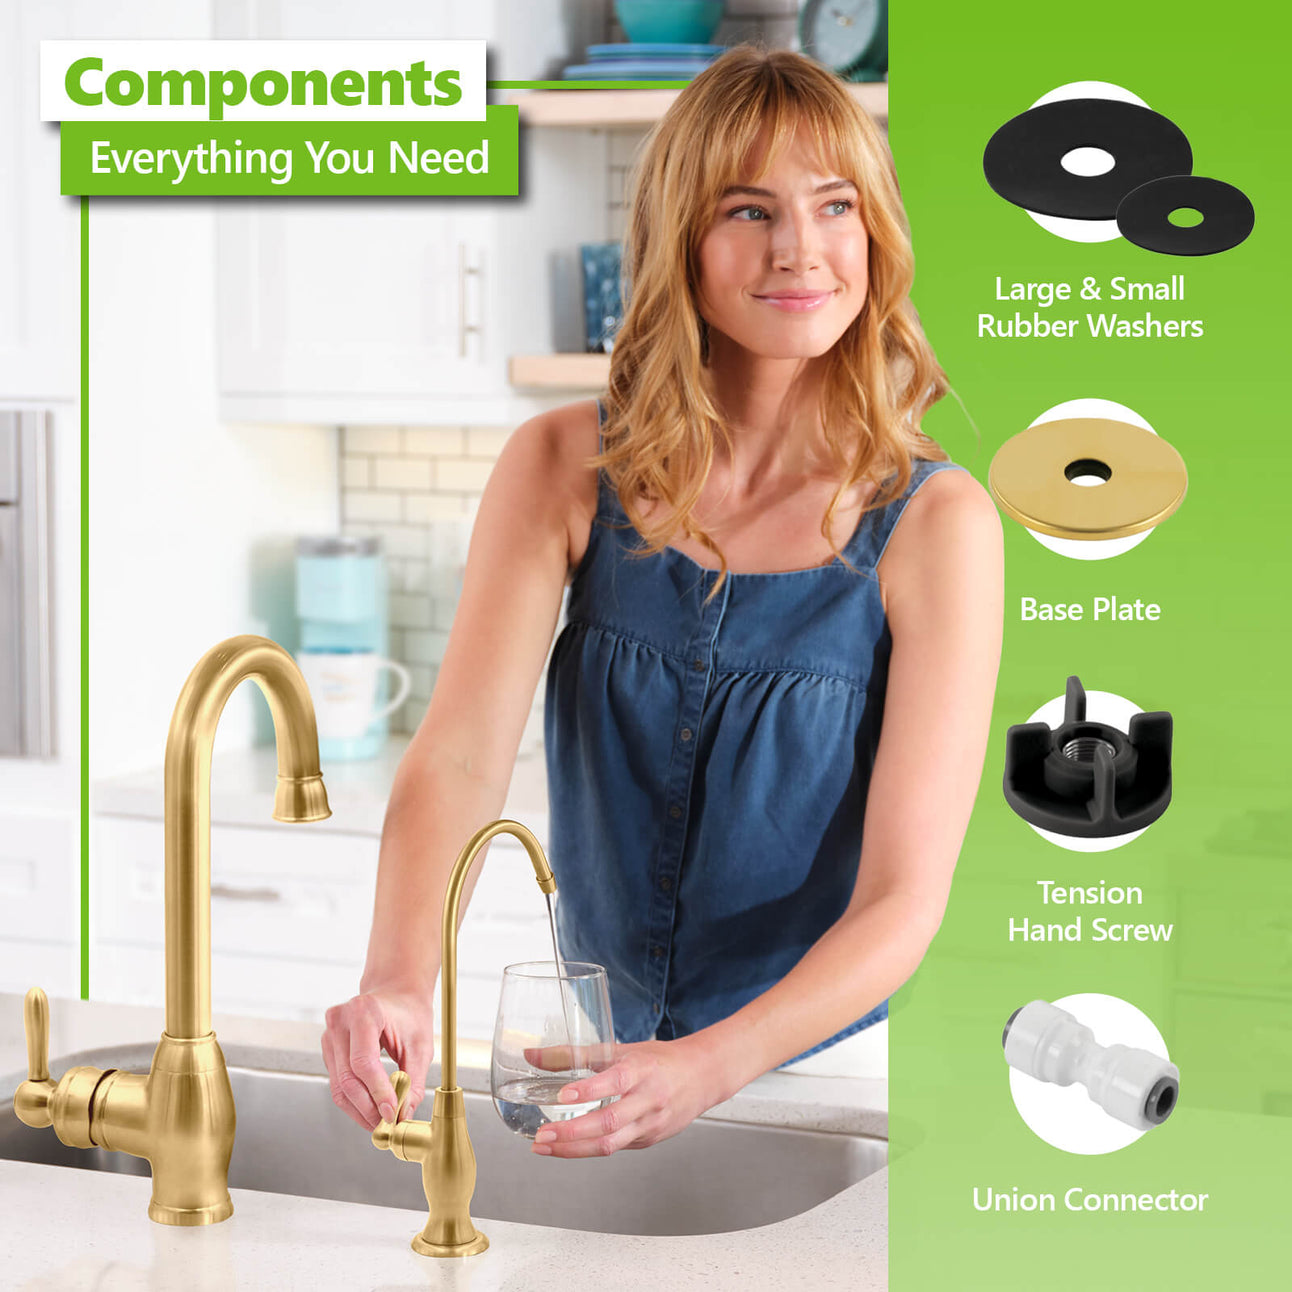 Express Water Deluxe Water Filter Faucet – Brushed Gold Coke-Shaped Faucet – 100% Lead-Free Drinking Water Faucet – Compatible with Reverse Osmosis Water Filtration Systems